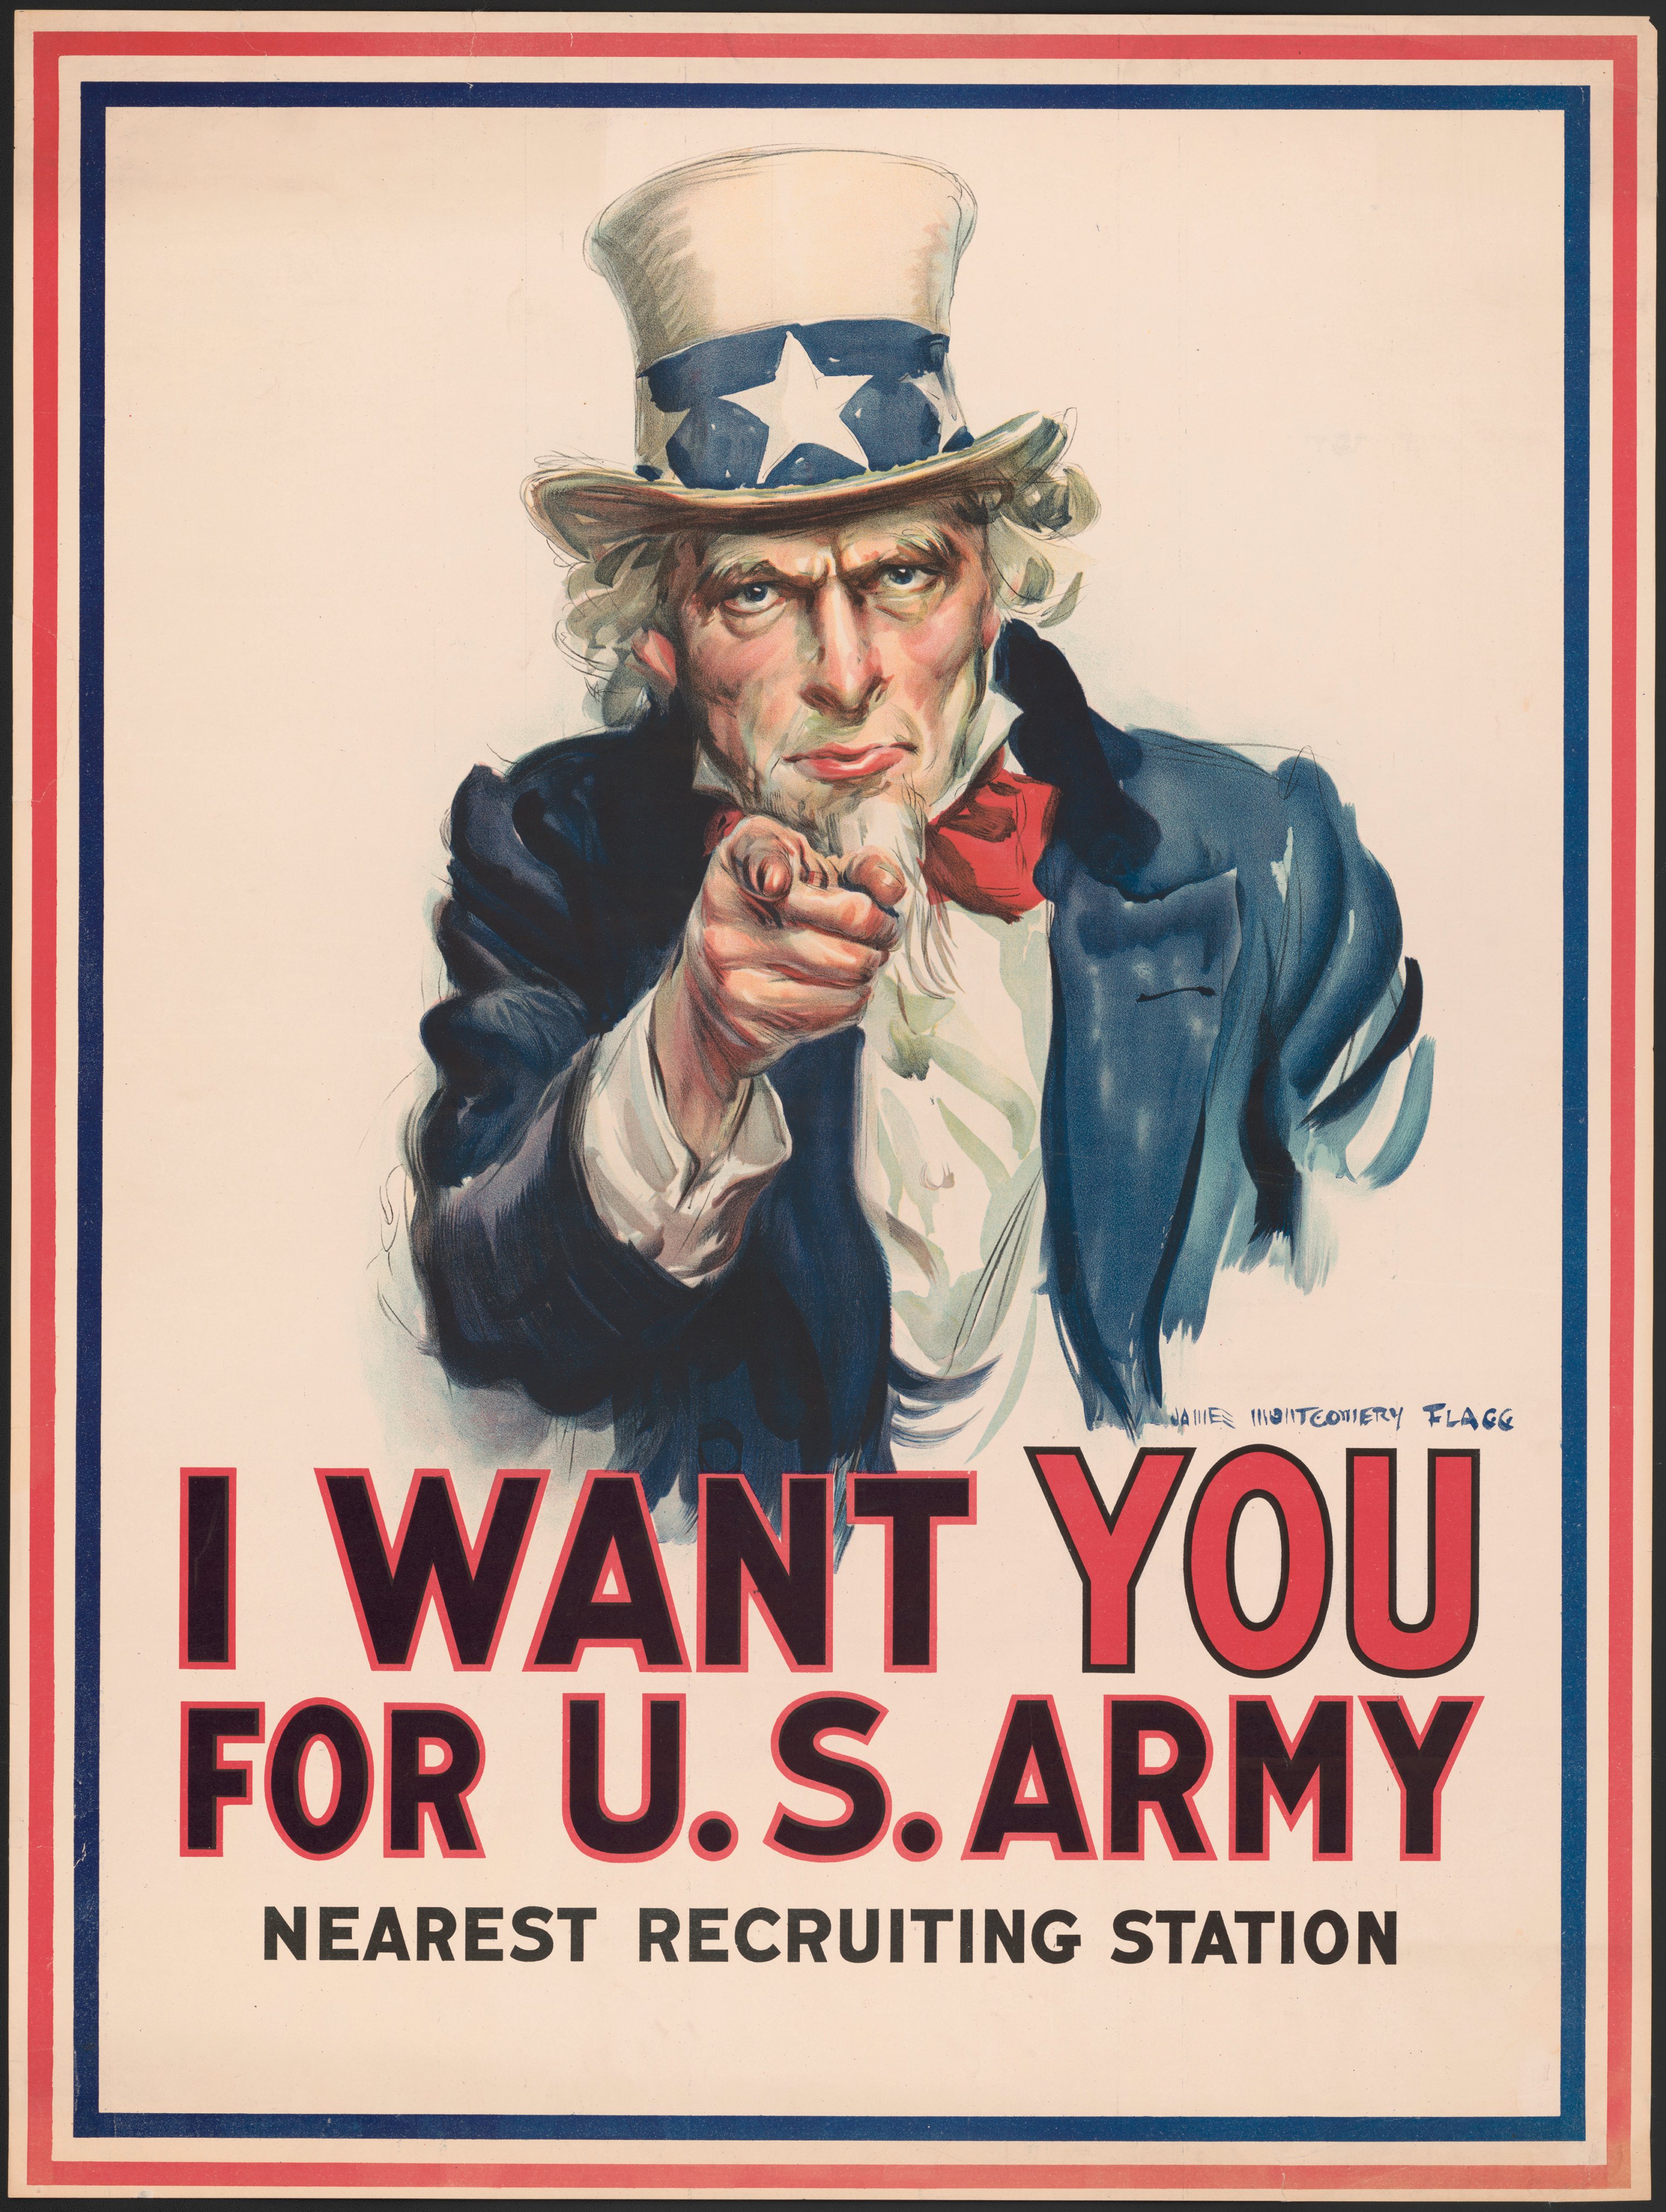 Uncle Sam Pointing Finger, &quot;I Want You for U.S. Army&quot;, World War I Recruitment Poster, by James Montgomery Flagg, USA, 1917